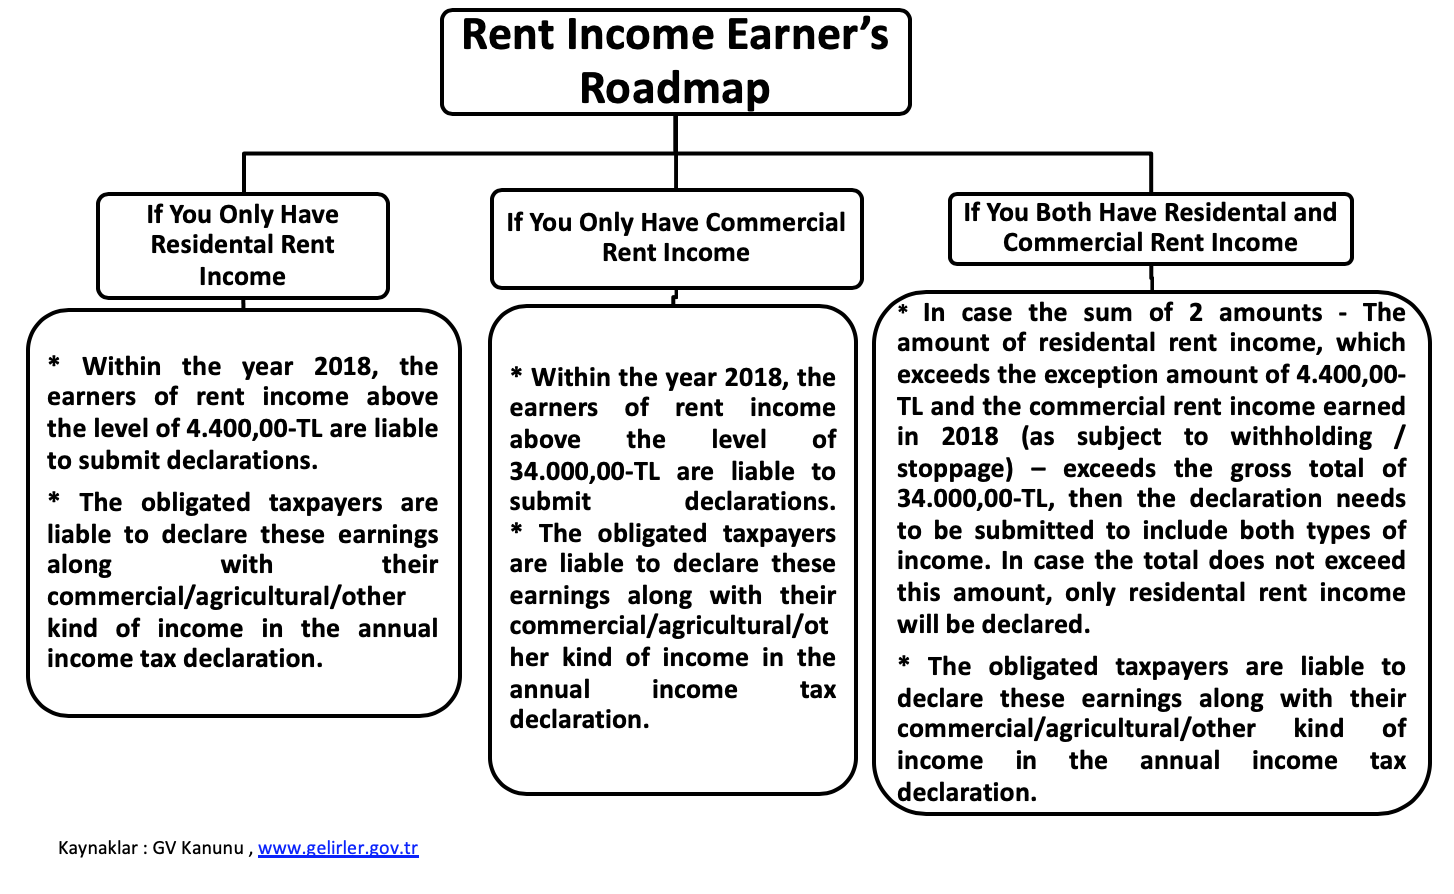 Tax Map For Rent Income Earners 2019